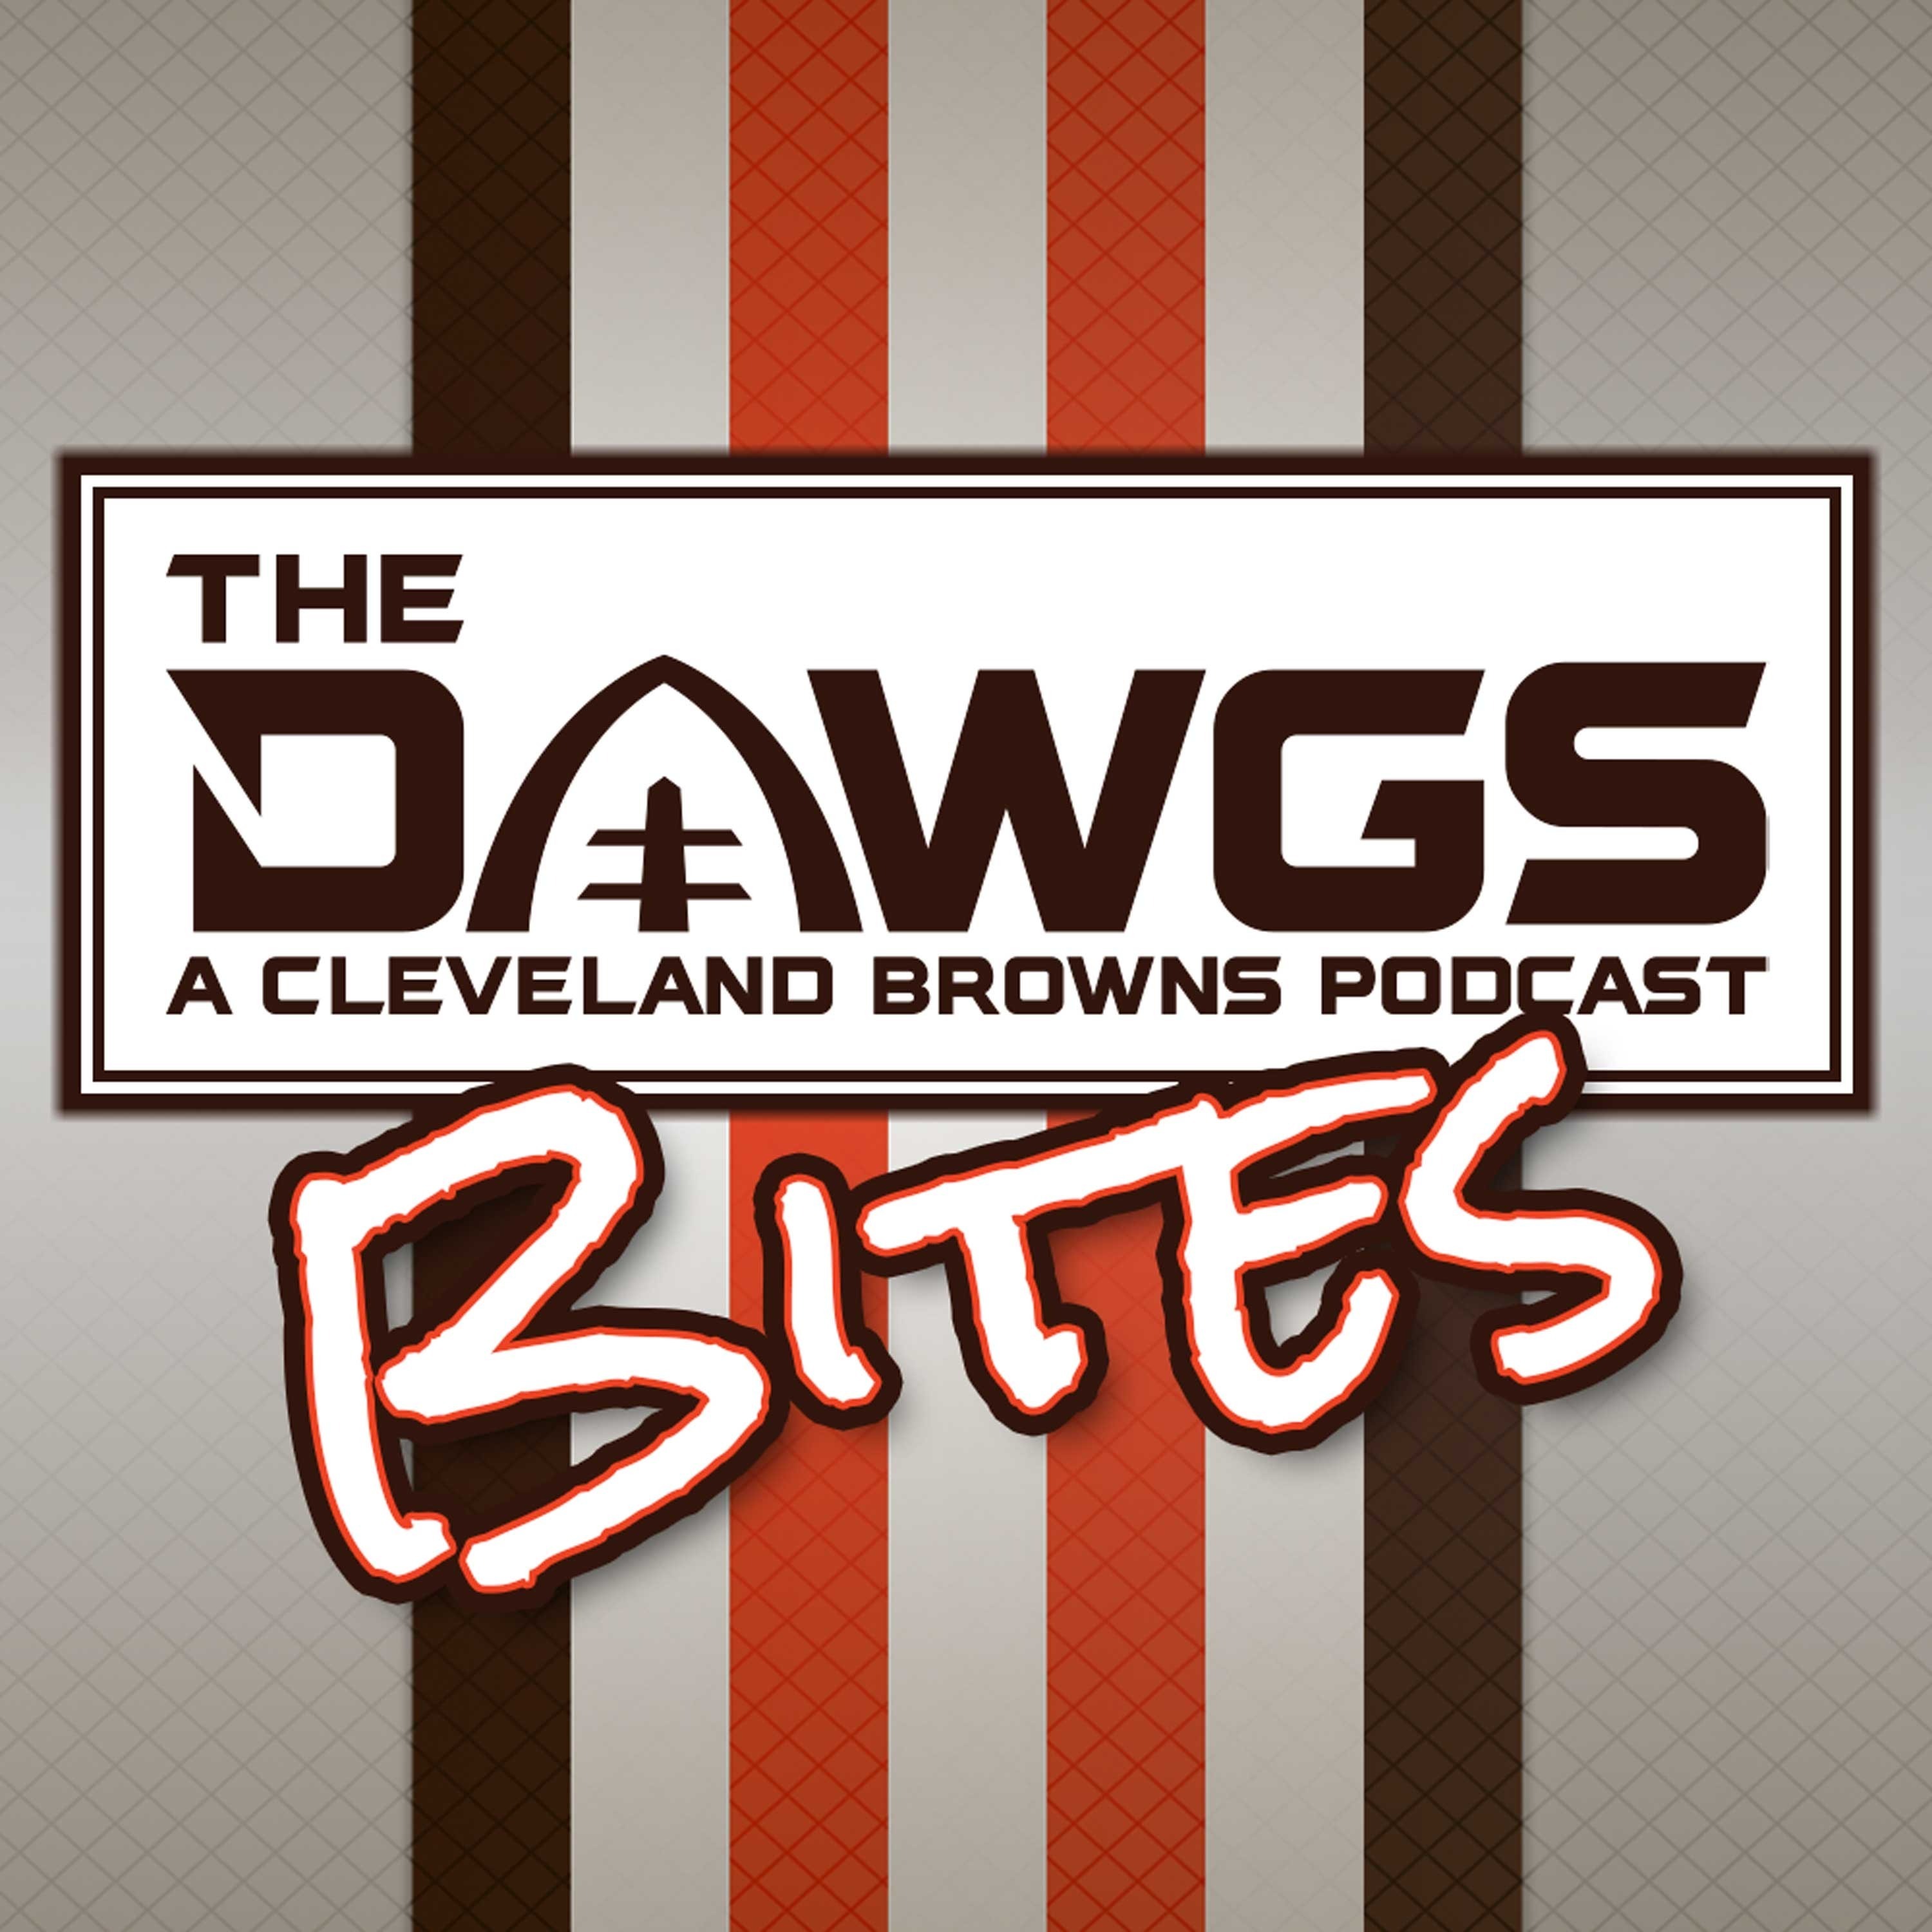 Ted Ginn Jr. Interview - Former Ohio State Buckeye and NFL Star - Cleveland Browns Podcast